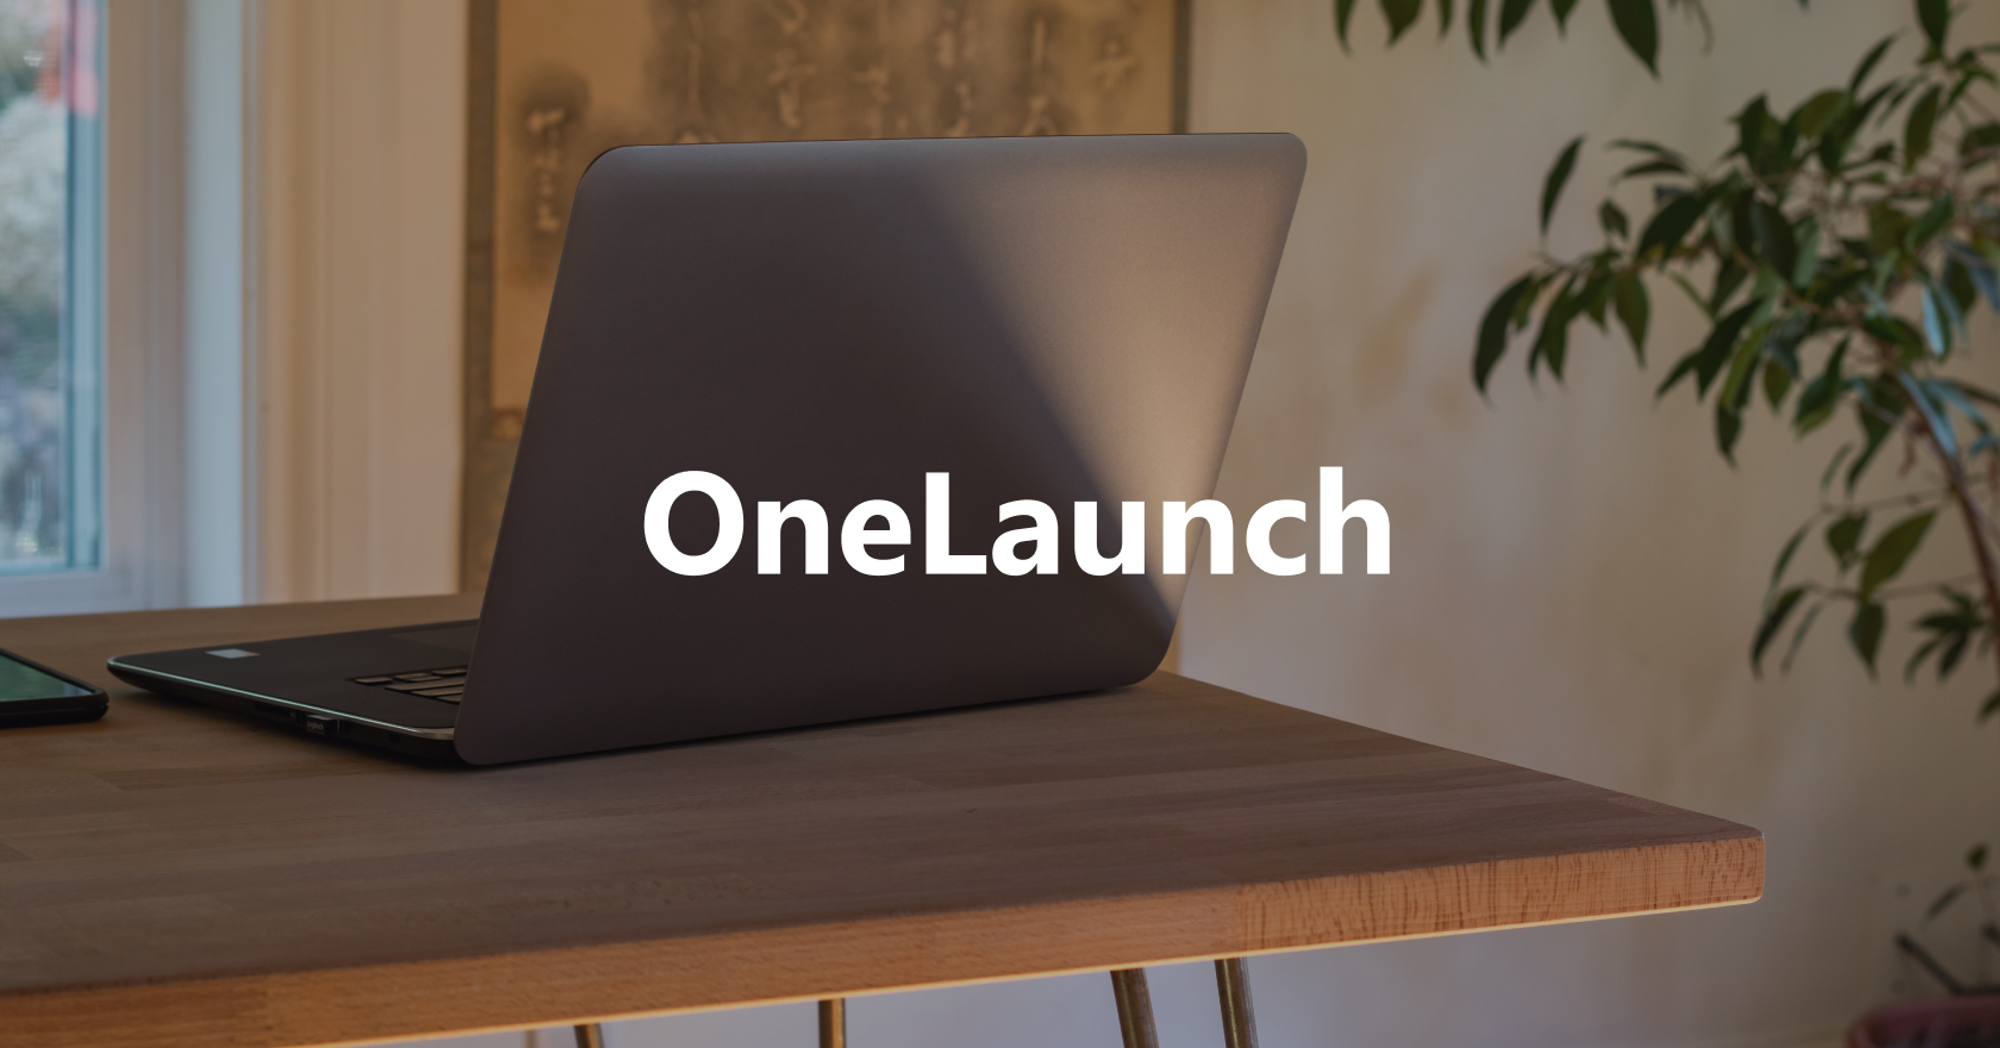 Onelaunch logo on top of laptop on desk